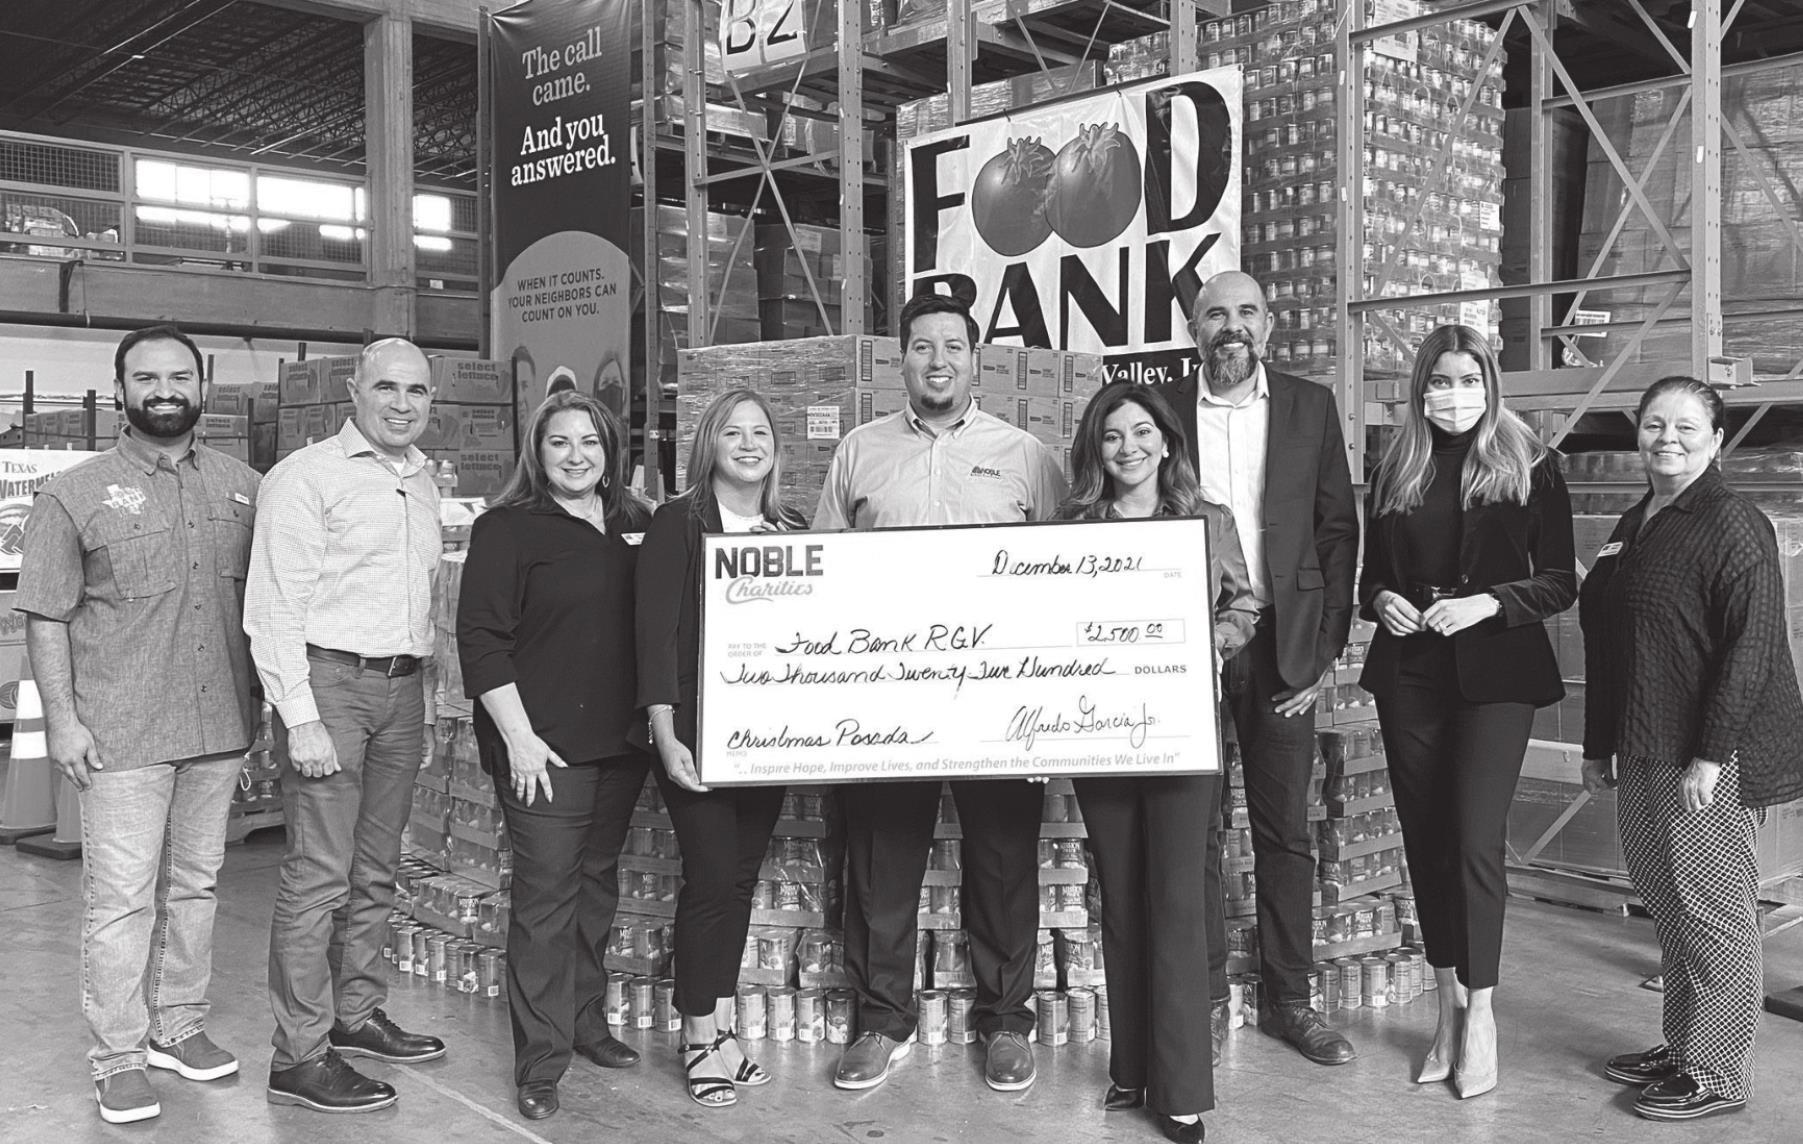 From left to right, Philip Farias, Food Bank RGV Manager of Special Events; Juan Delgado, Noble Vice President; Libby A. Saenz, Food Bank RGV CEO; Saby García, Noble Charities Board Member; Alfredo Garcia Jr., Noble Vice President; Celine Perez, Noble HR